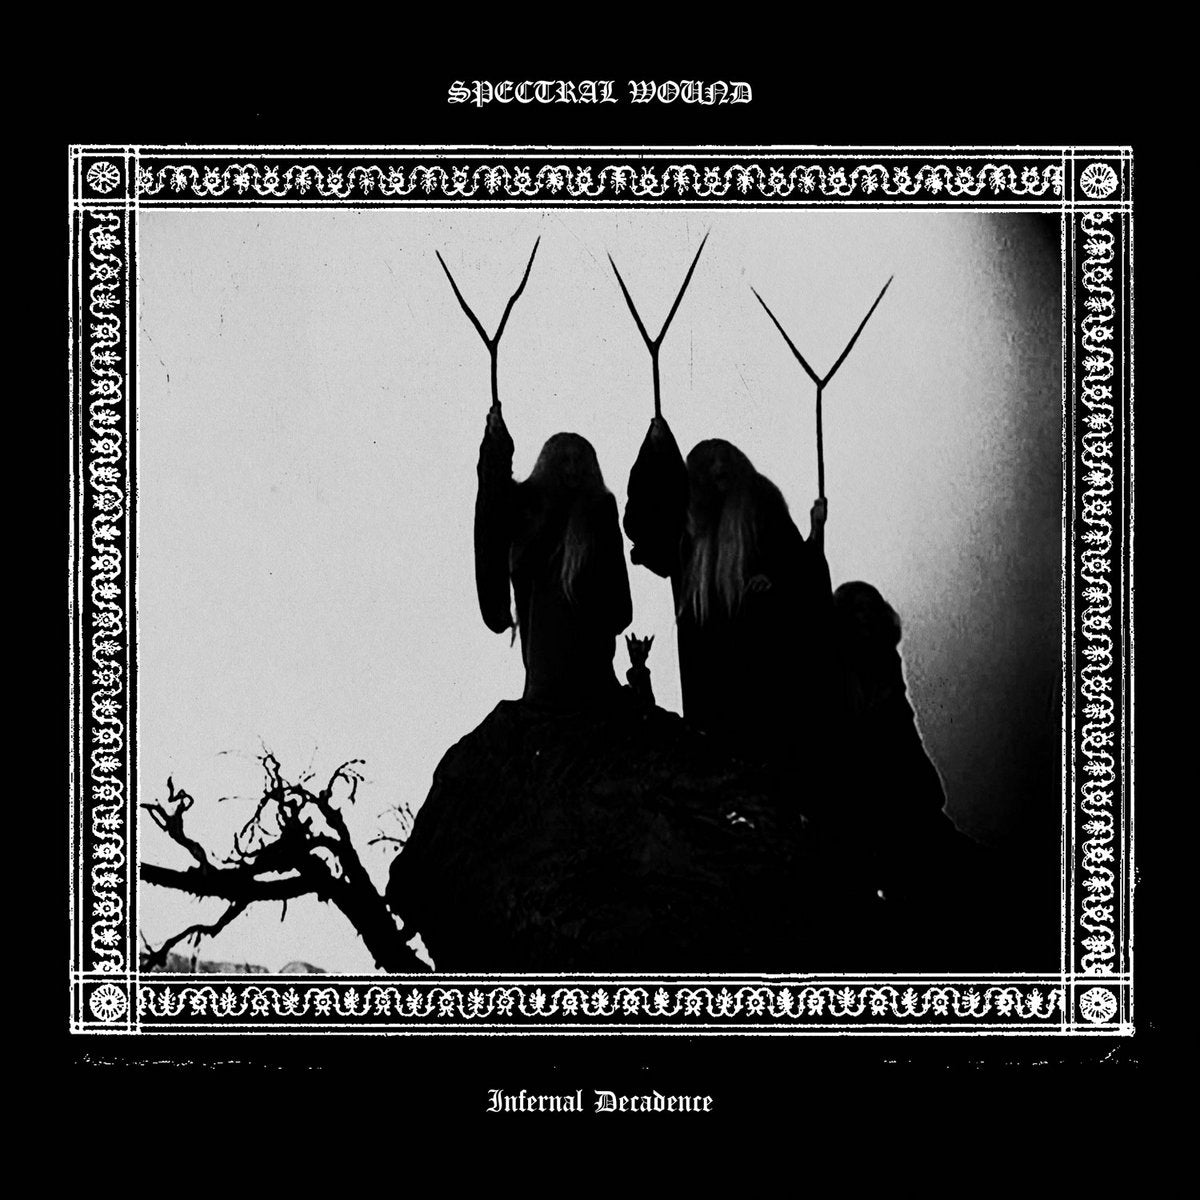 [SOLD OUT] SPECTRAL WOUND "Infernal Decadence" CD